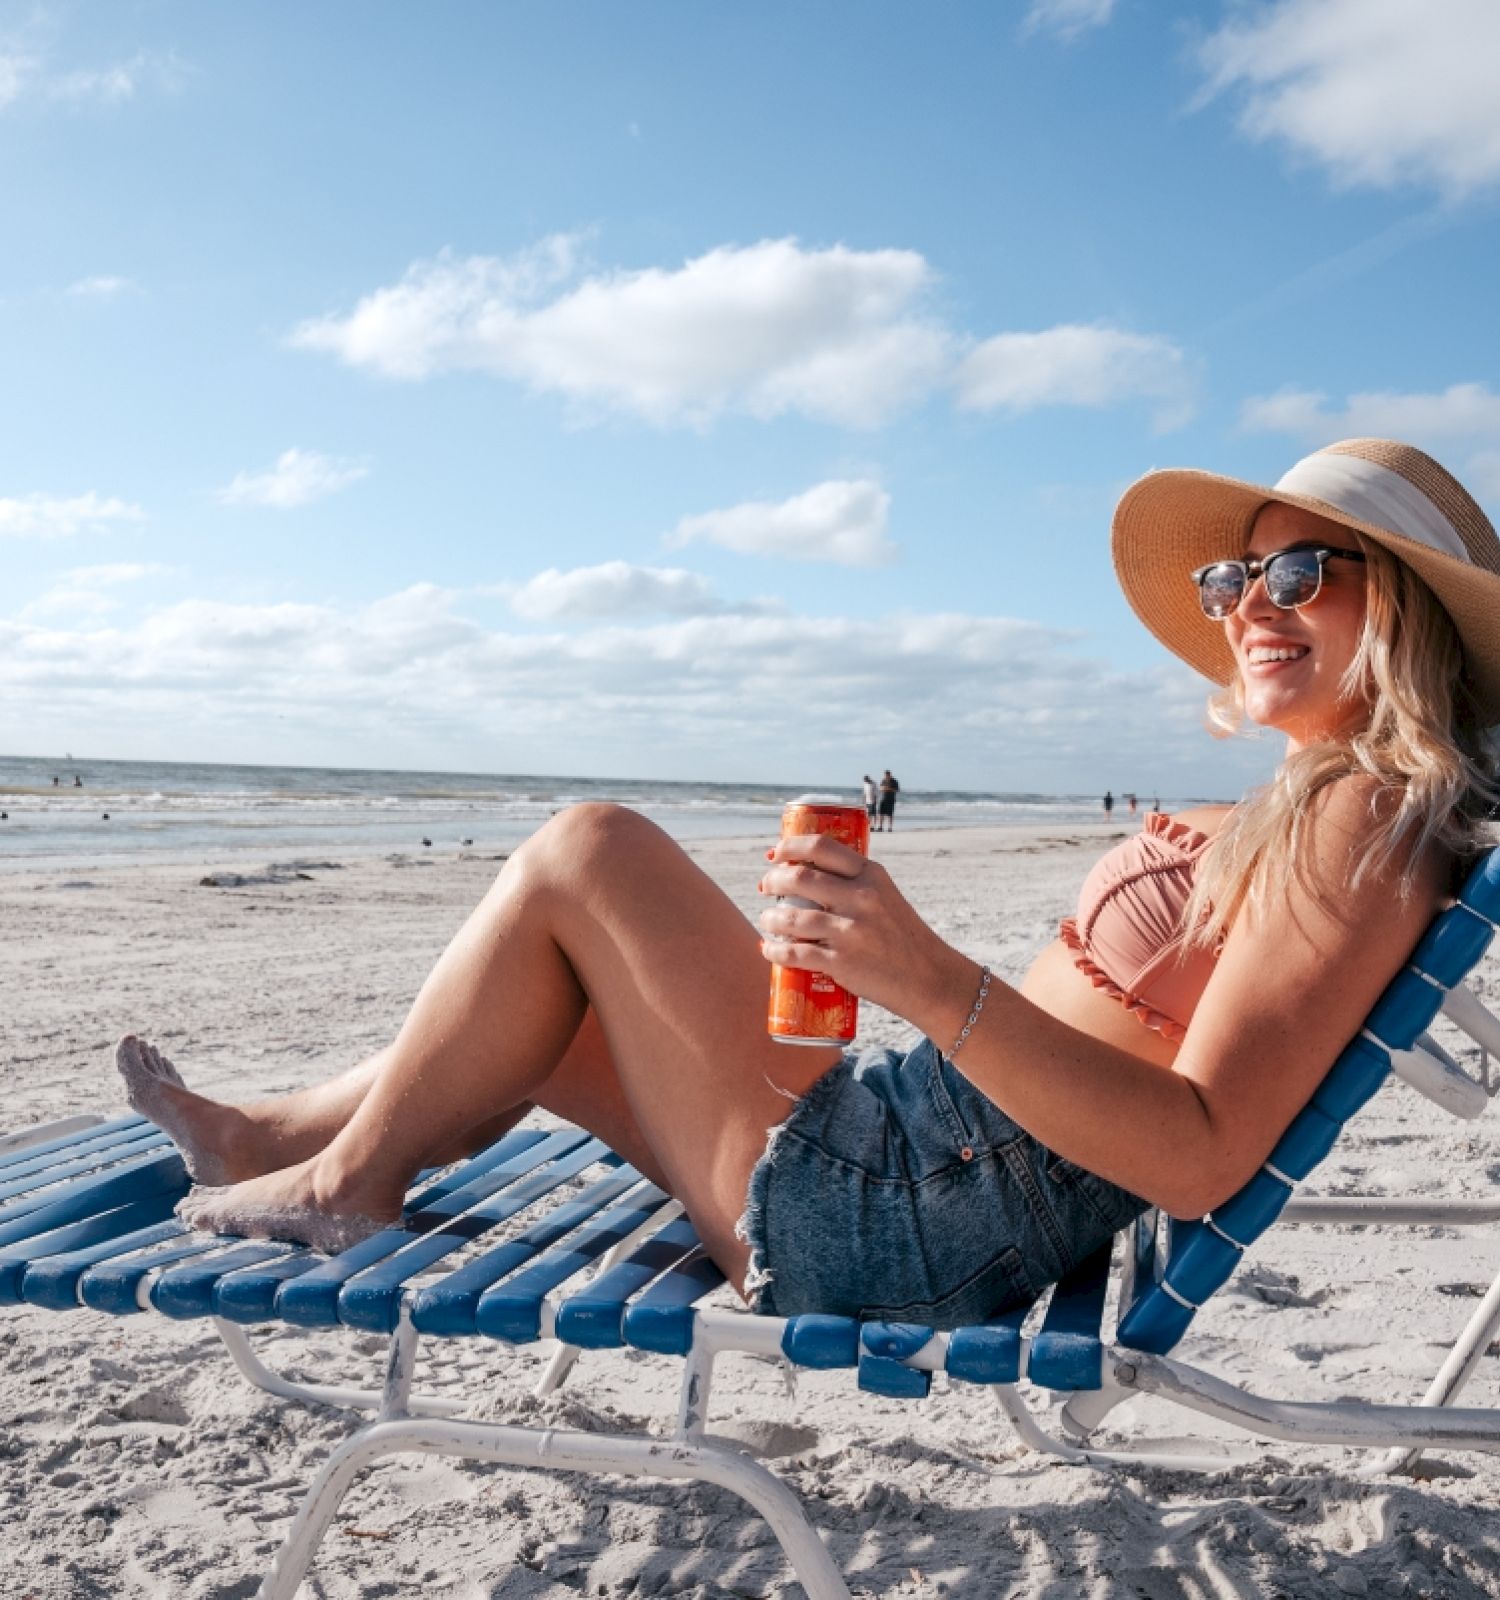 A person is relaxing on a beach chair with a drink, wearing sunglasses and a hat, on a sandy beach.